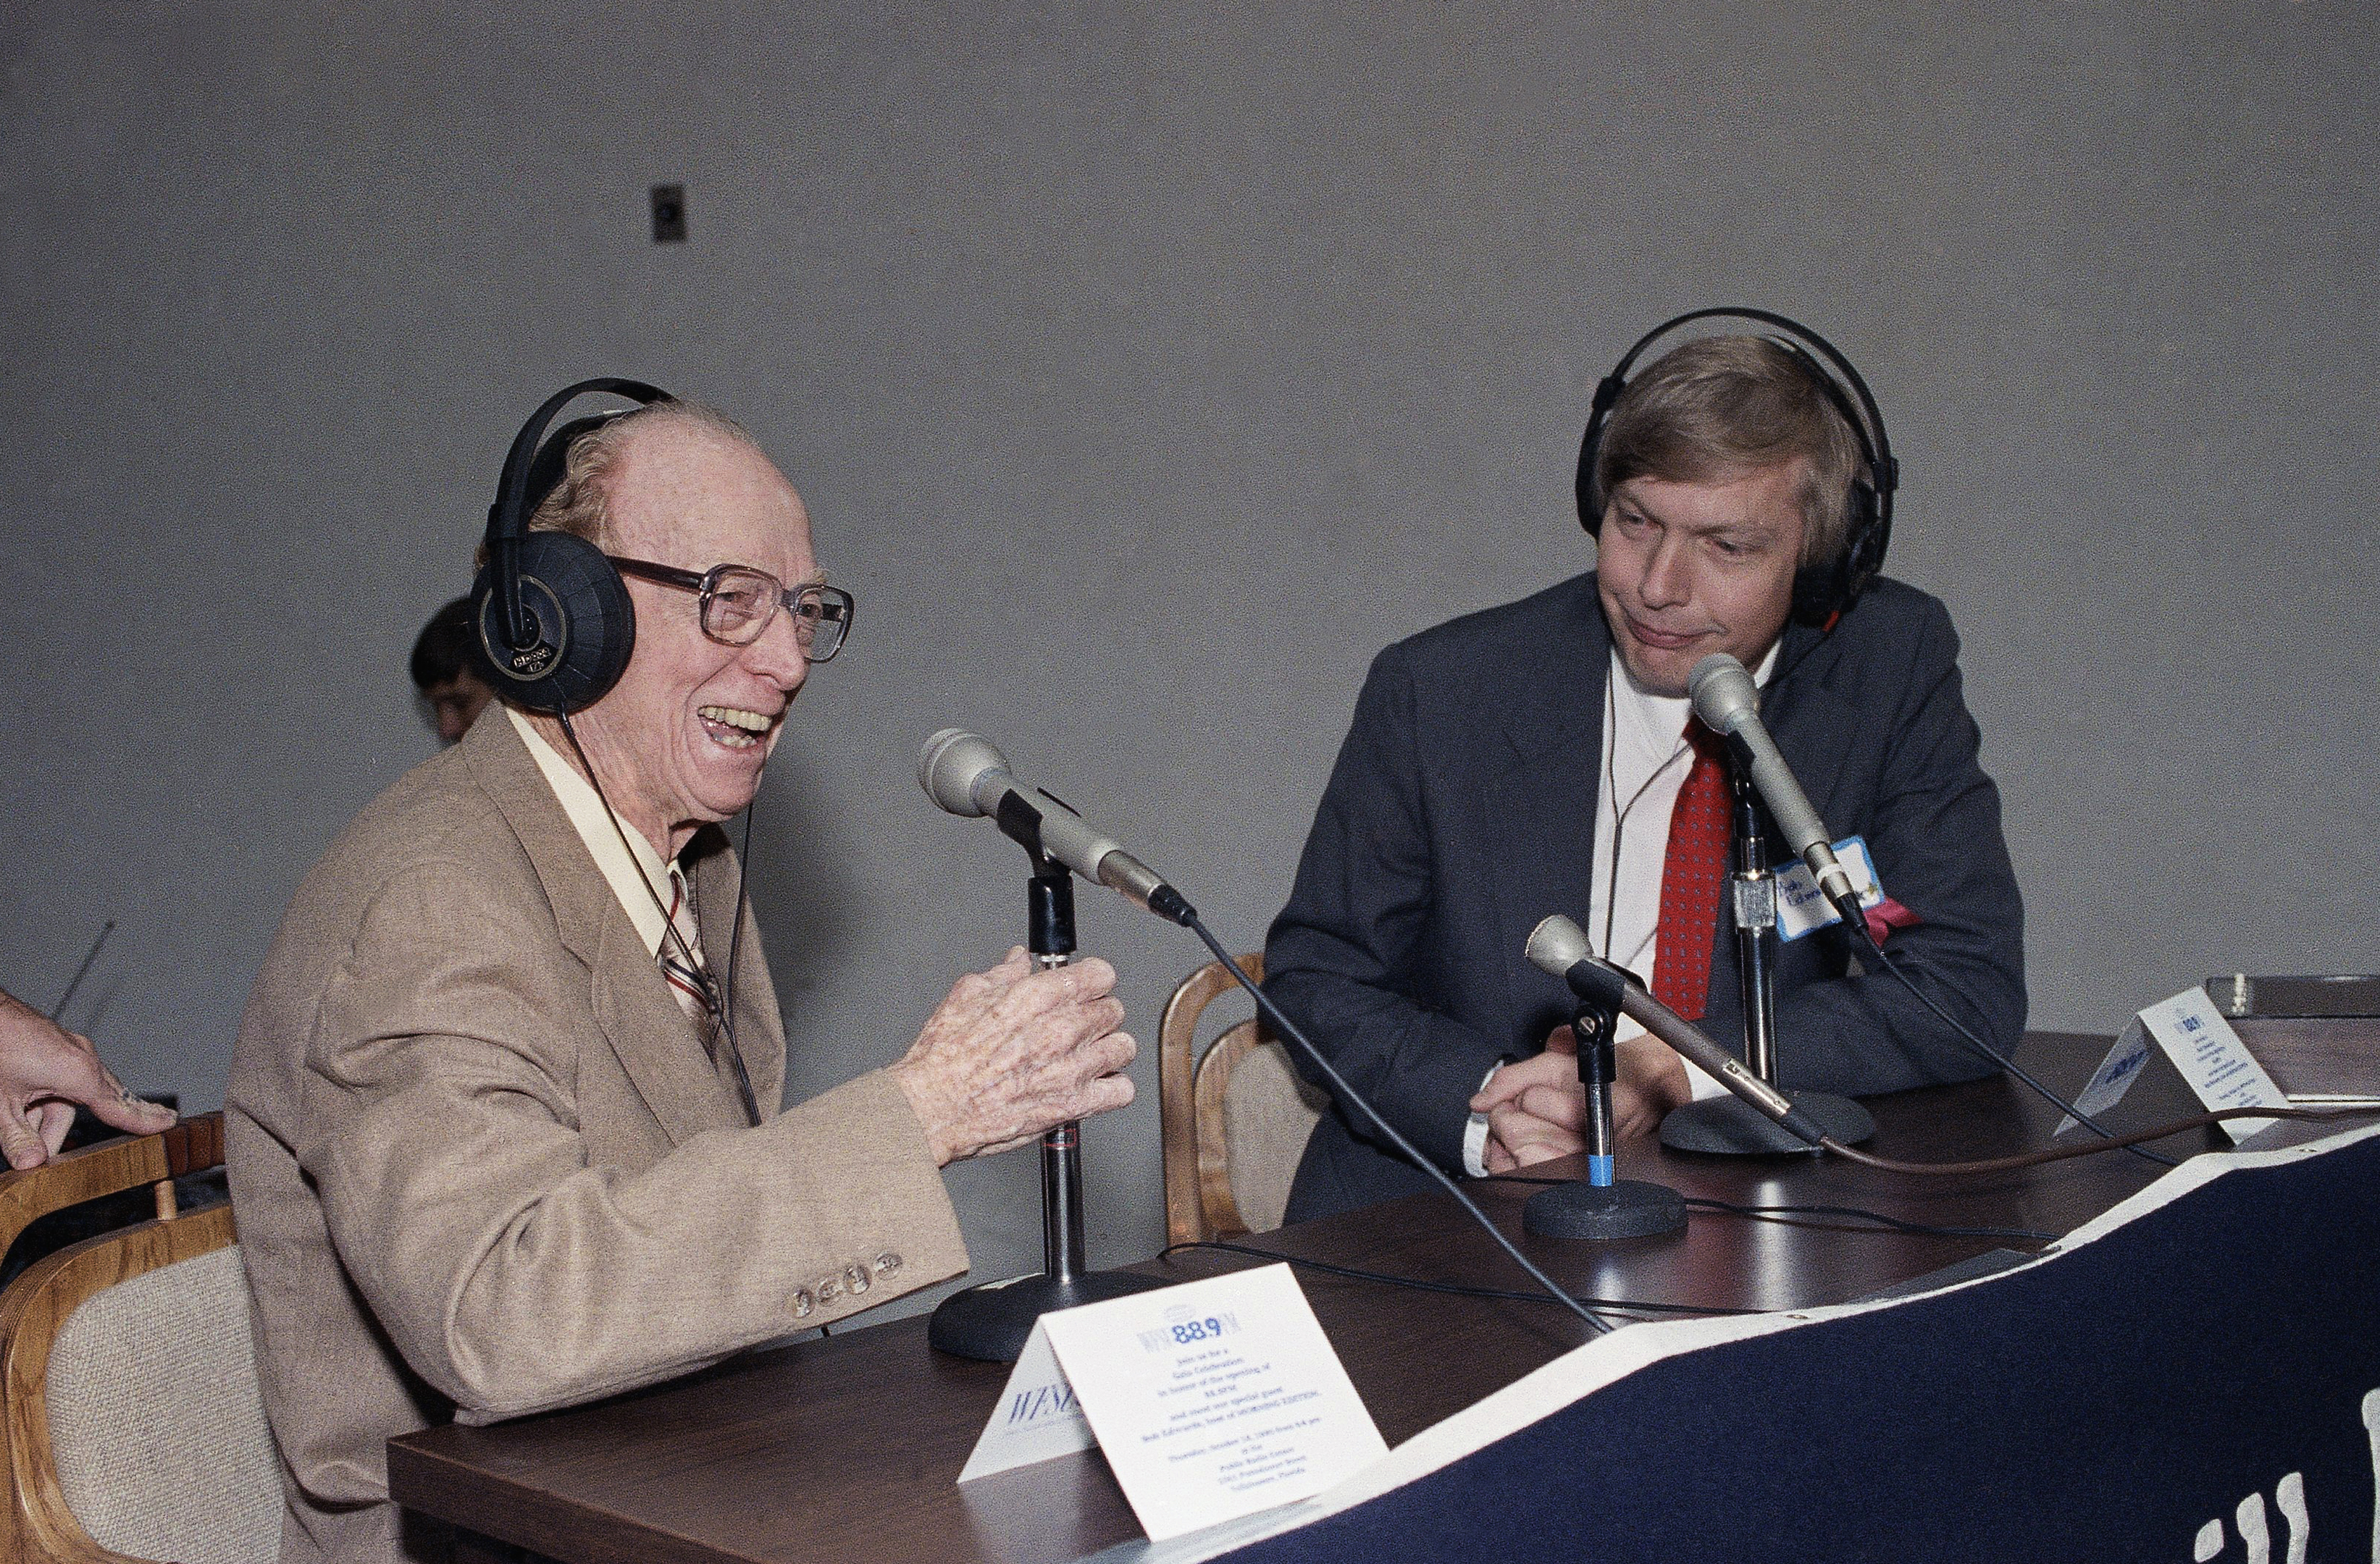 Red Barber with NPR’s Bob Edwards, Oct. 22, 1992. (AP Photo)